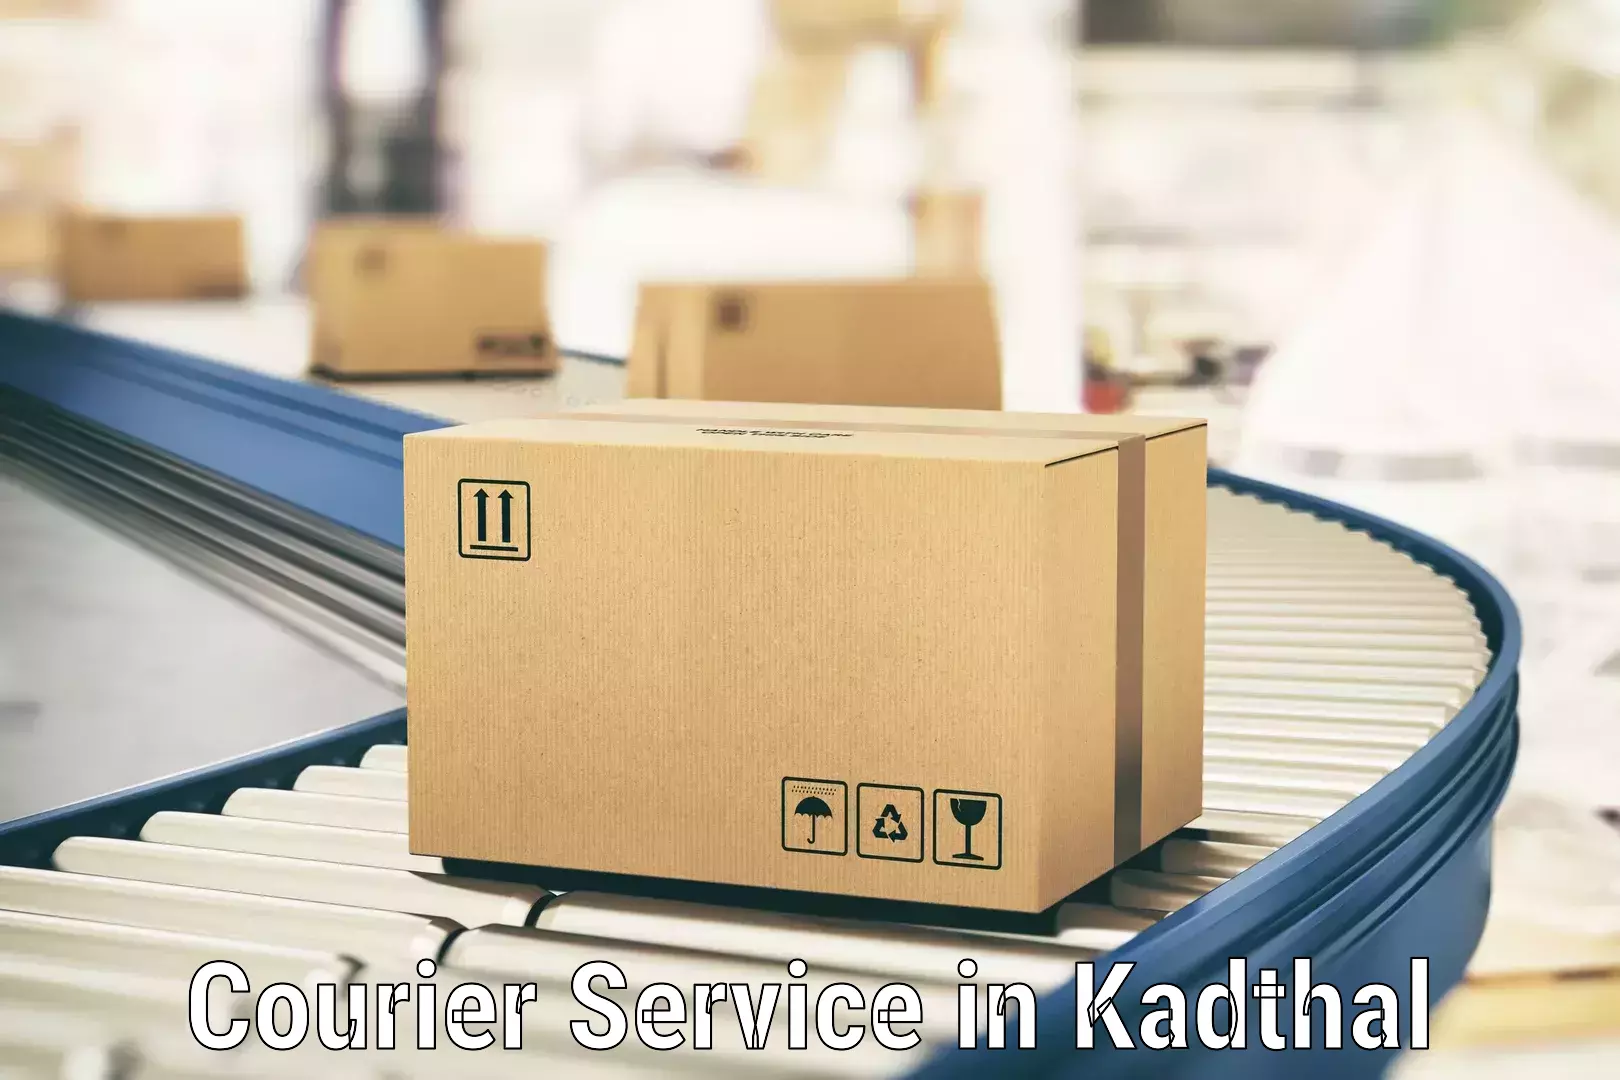 On-time delivery services in Kadthal